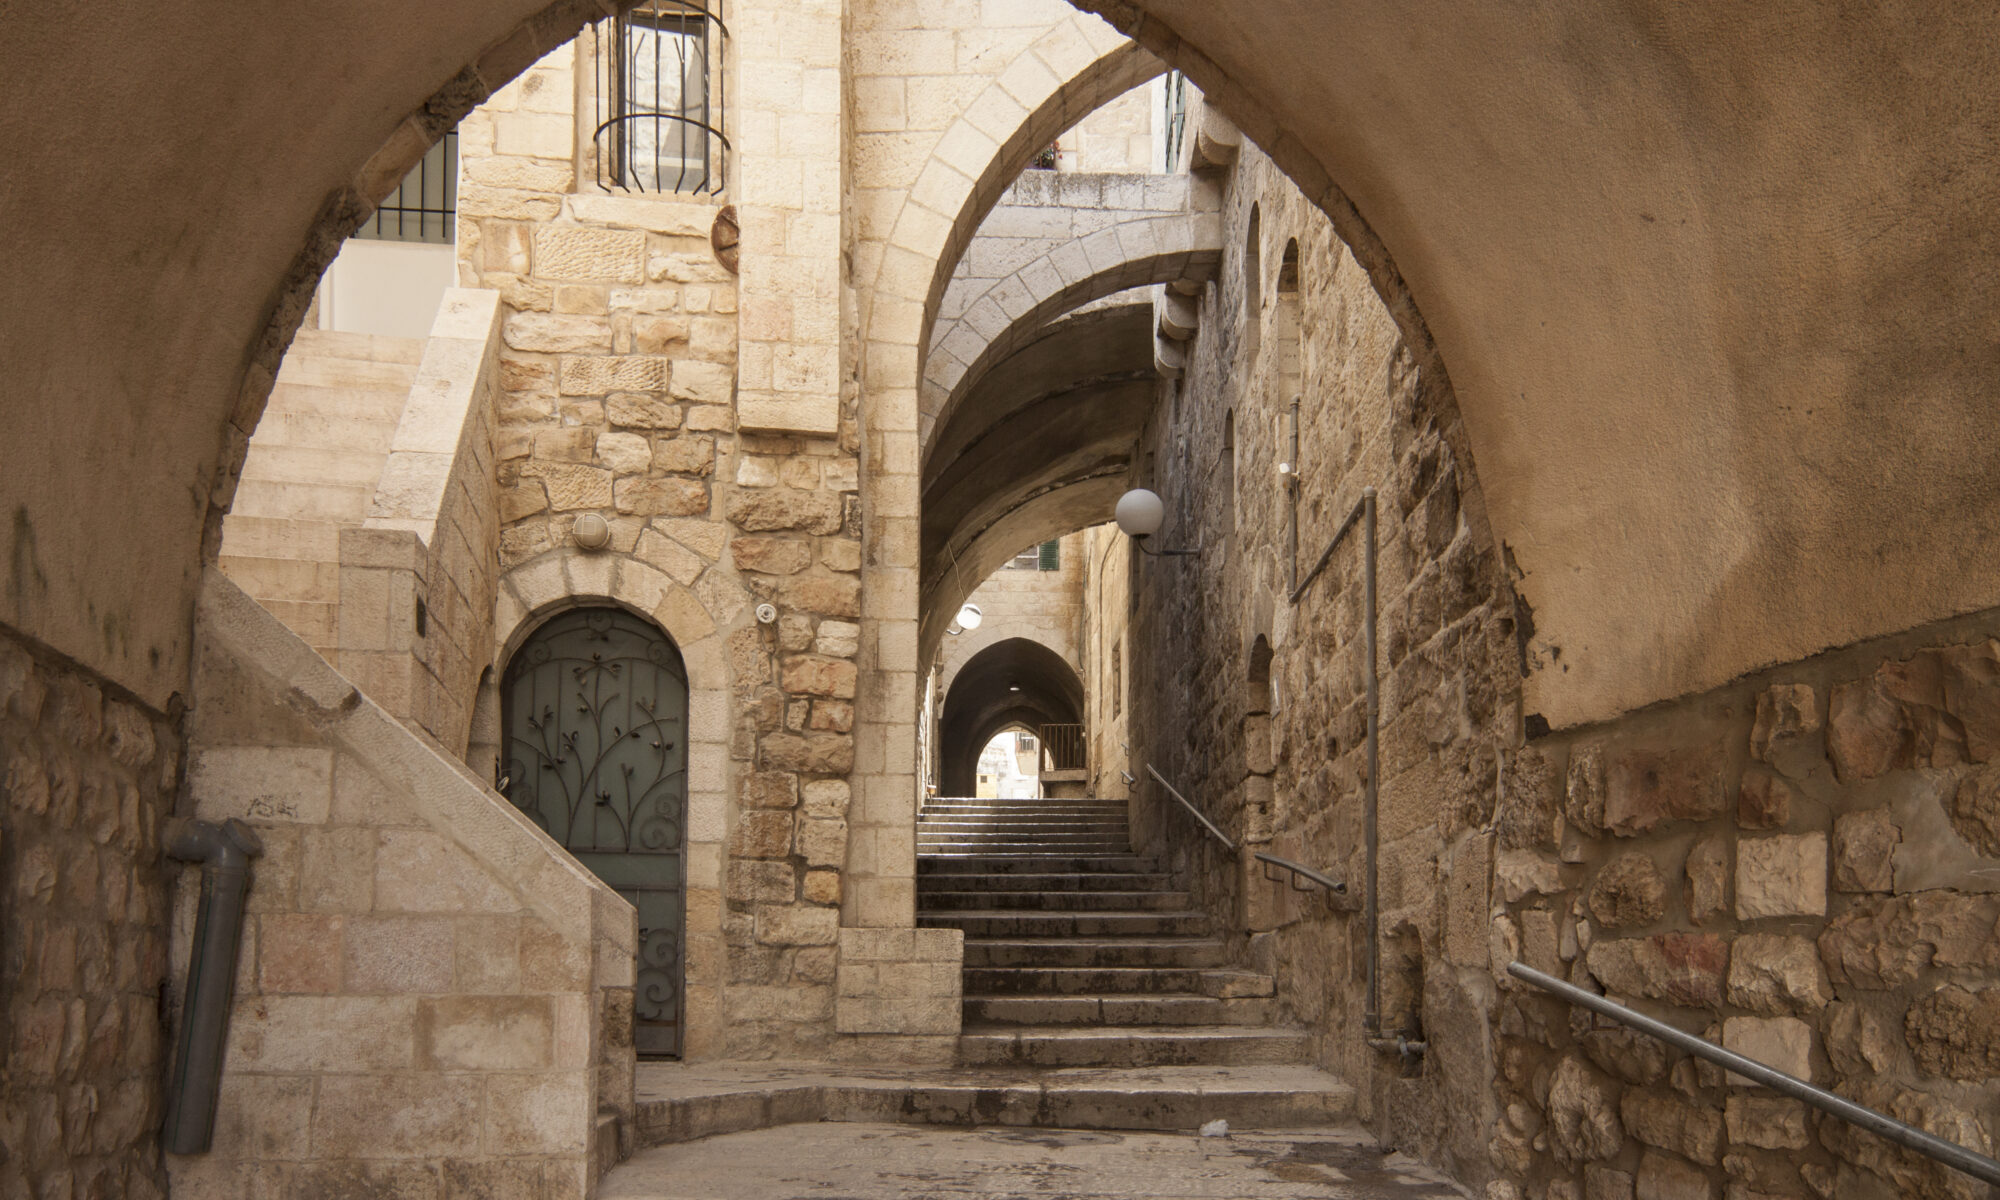 An image of stairways and arches in the Old City of Jerusalem